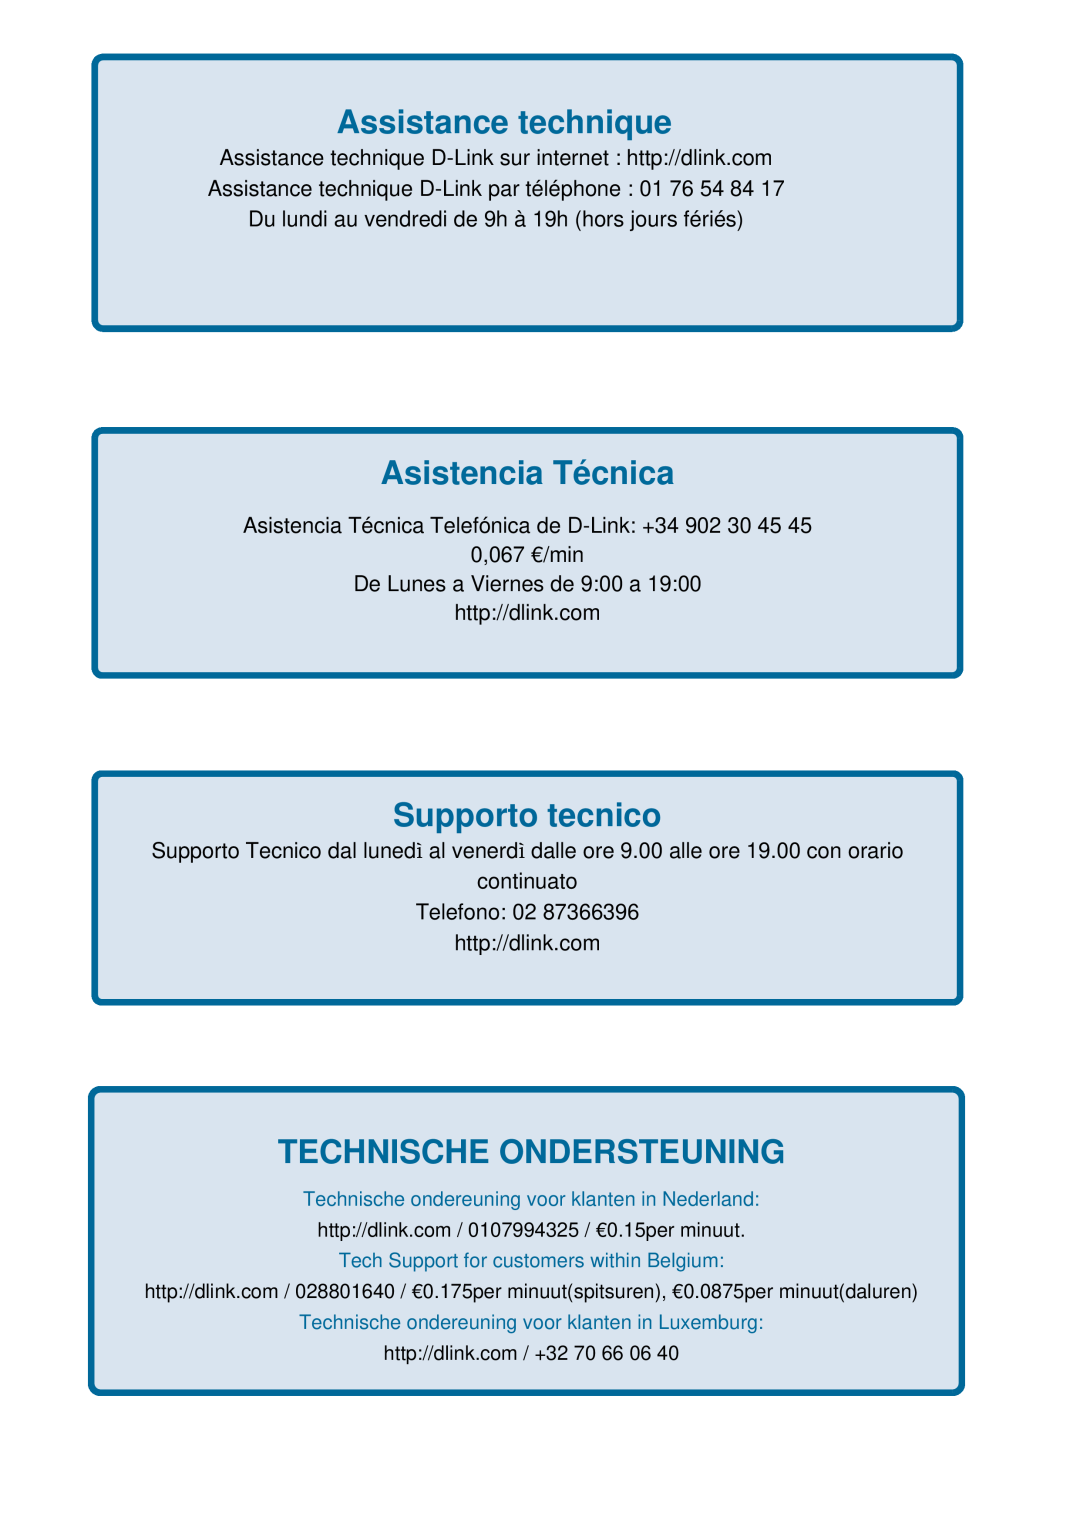 D-Link ethernet managed switch manual Assistance technique, Asistencia Técnica, Supporto tecnico, Technische Ondersteuning 